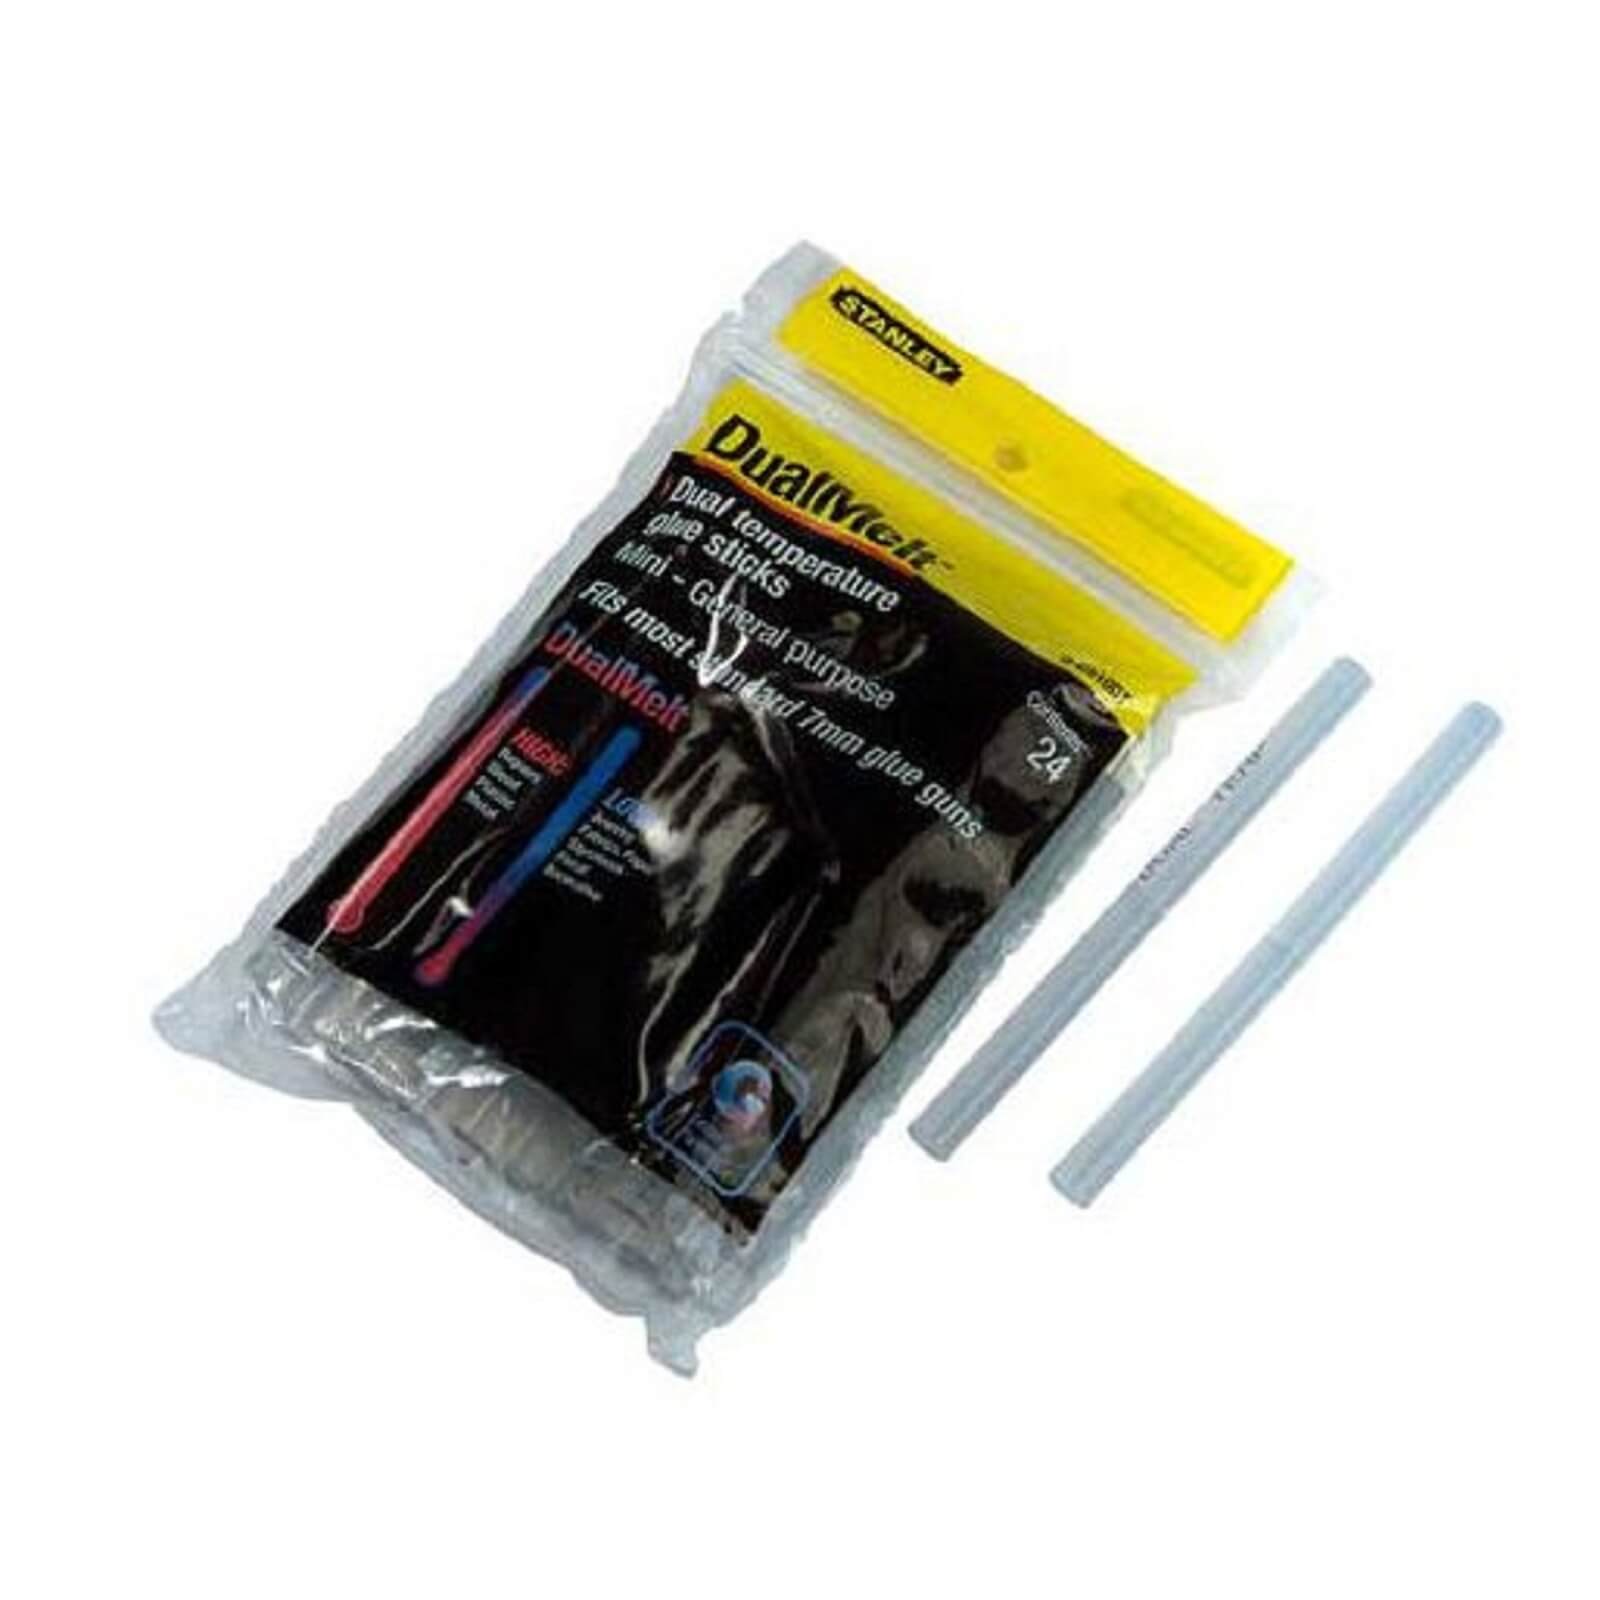 Photo of Stanley Dualmelt 7x101 Mm Glue Sticks Pack Of 24 -1-gs10dt-